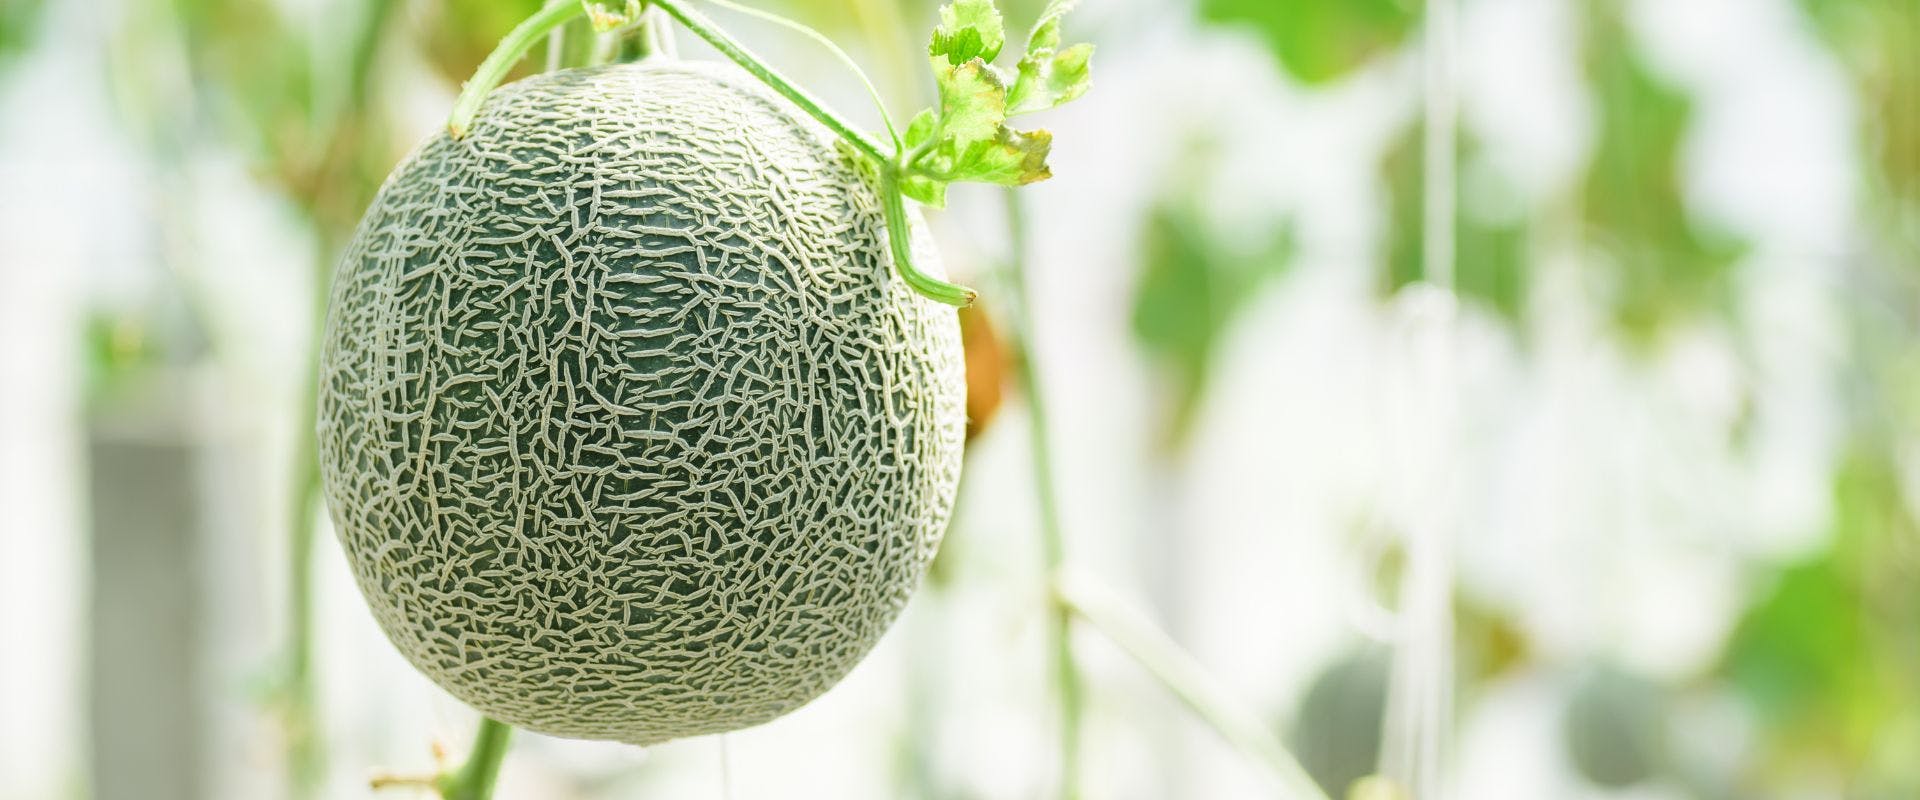 Cantaloupe melon growing from plant